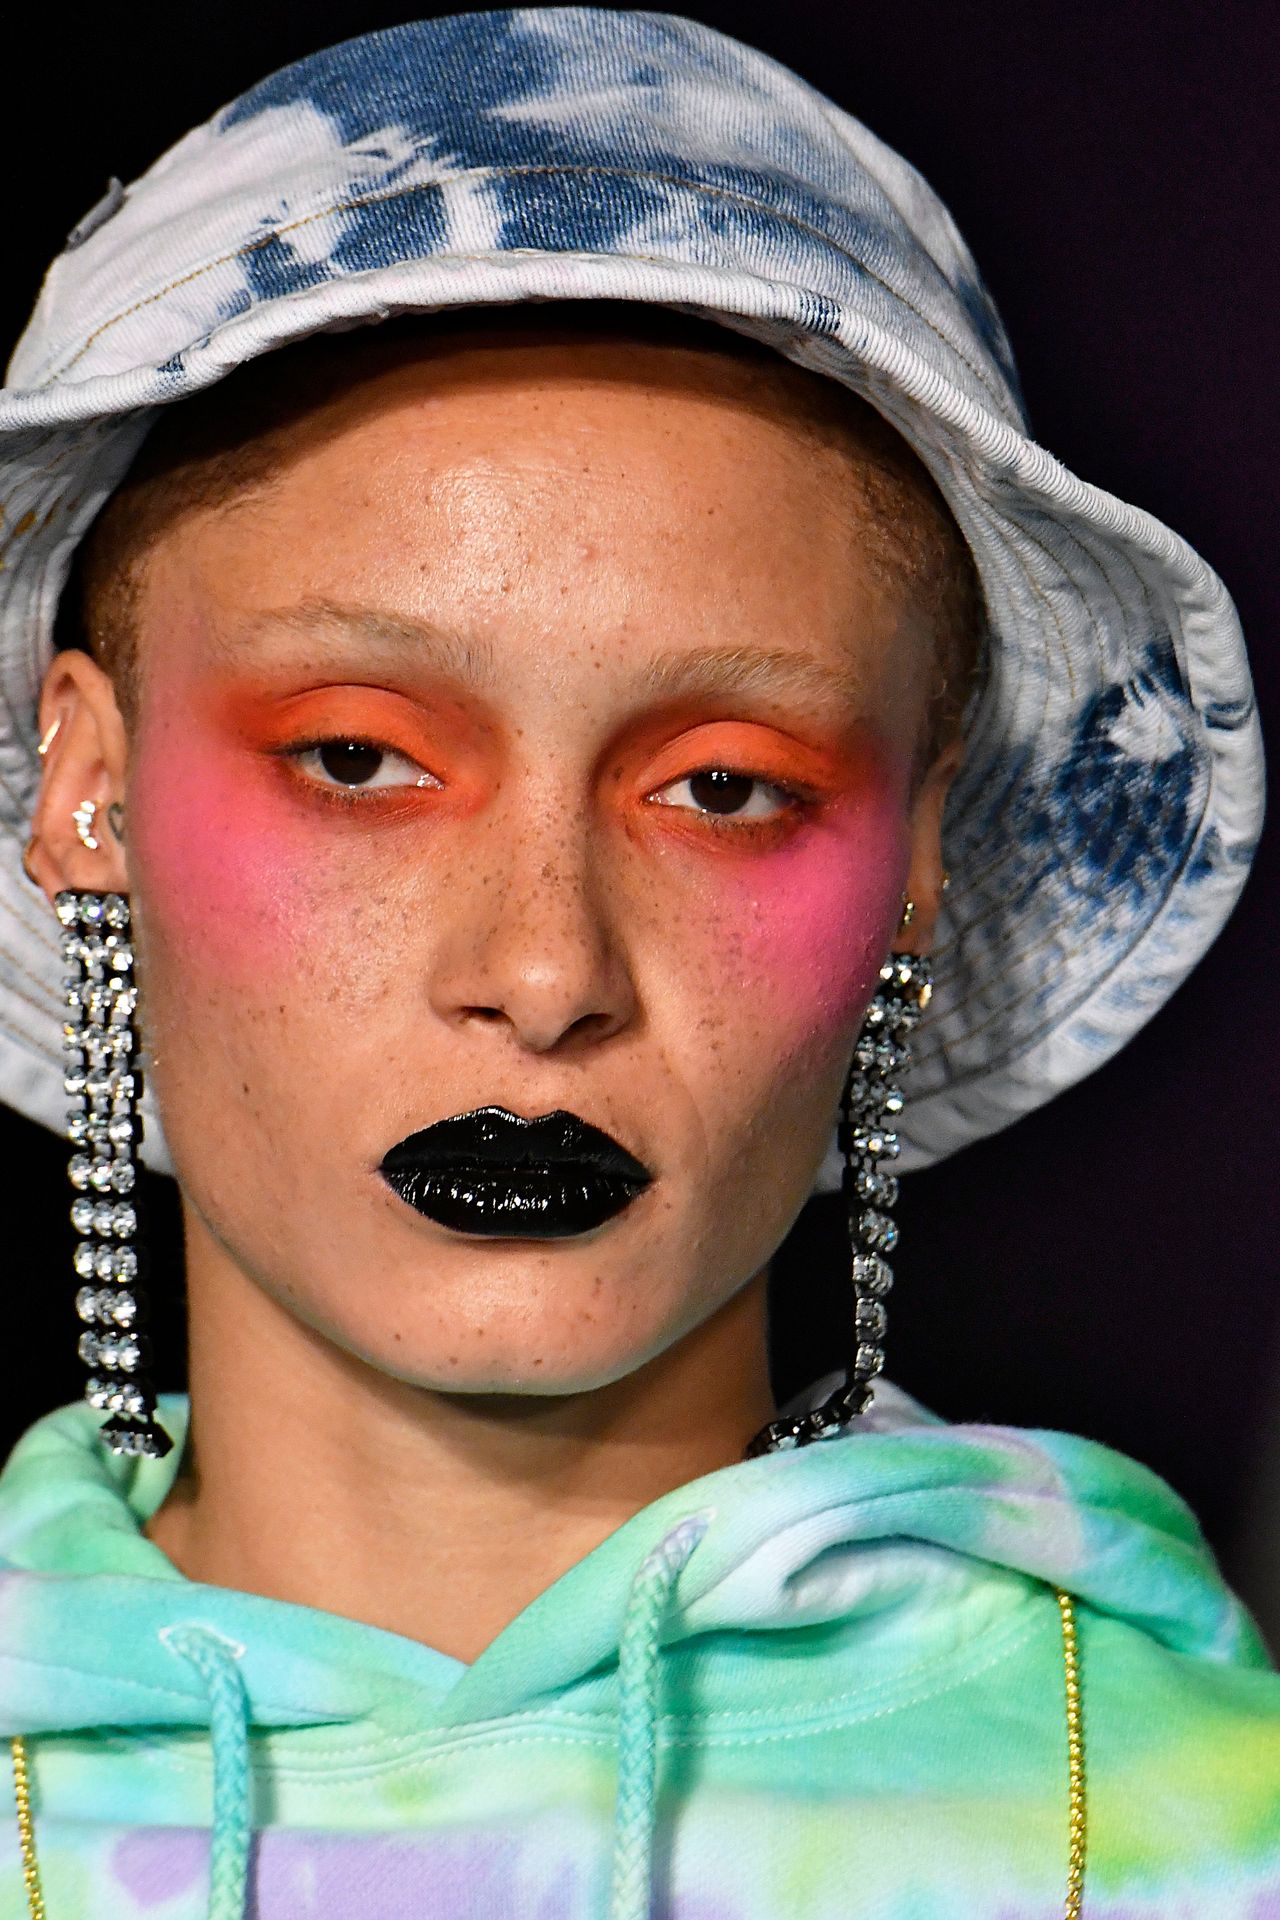 Adwoa Aboah looked stunning in this bright pink blush for Ashley Williams AW18 catwalk, proving the shade is flattering on a variety of skin tones.